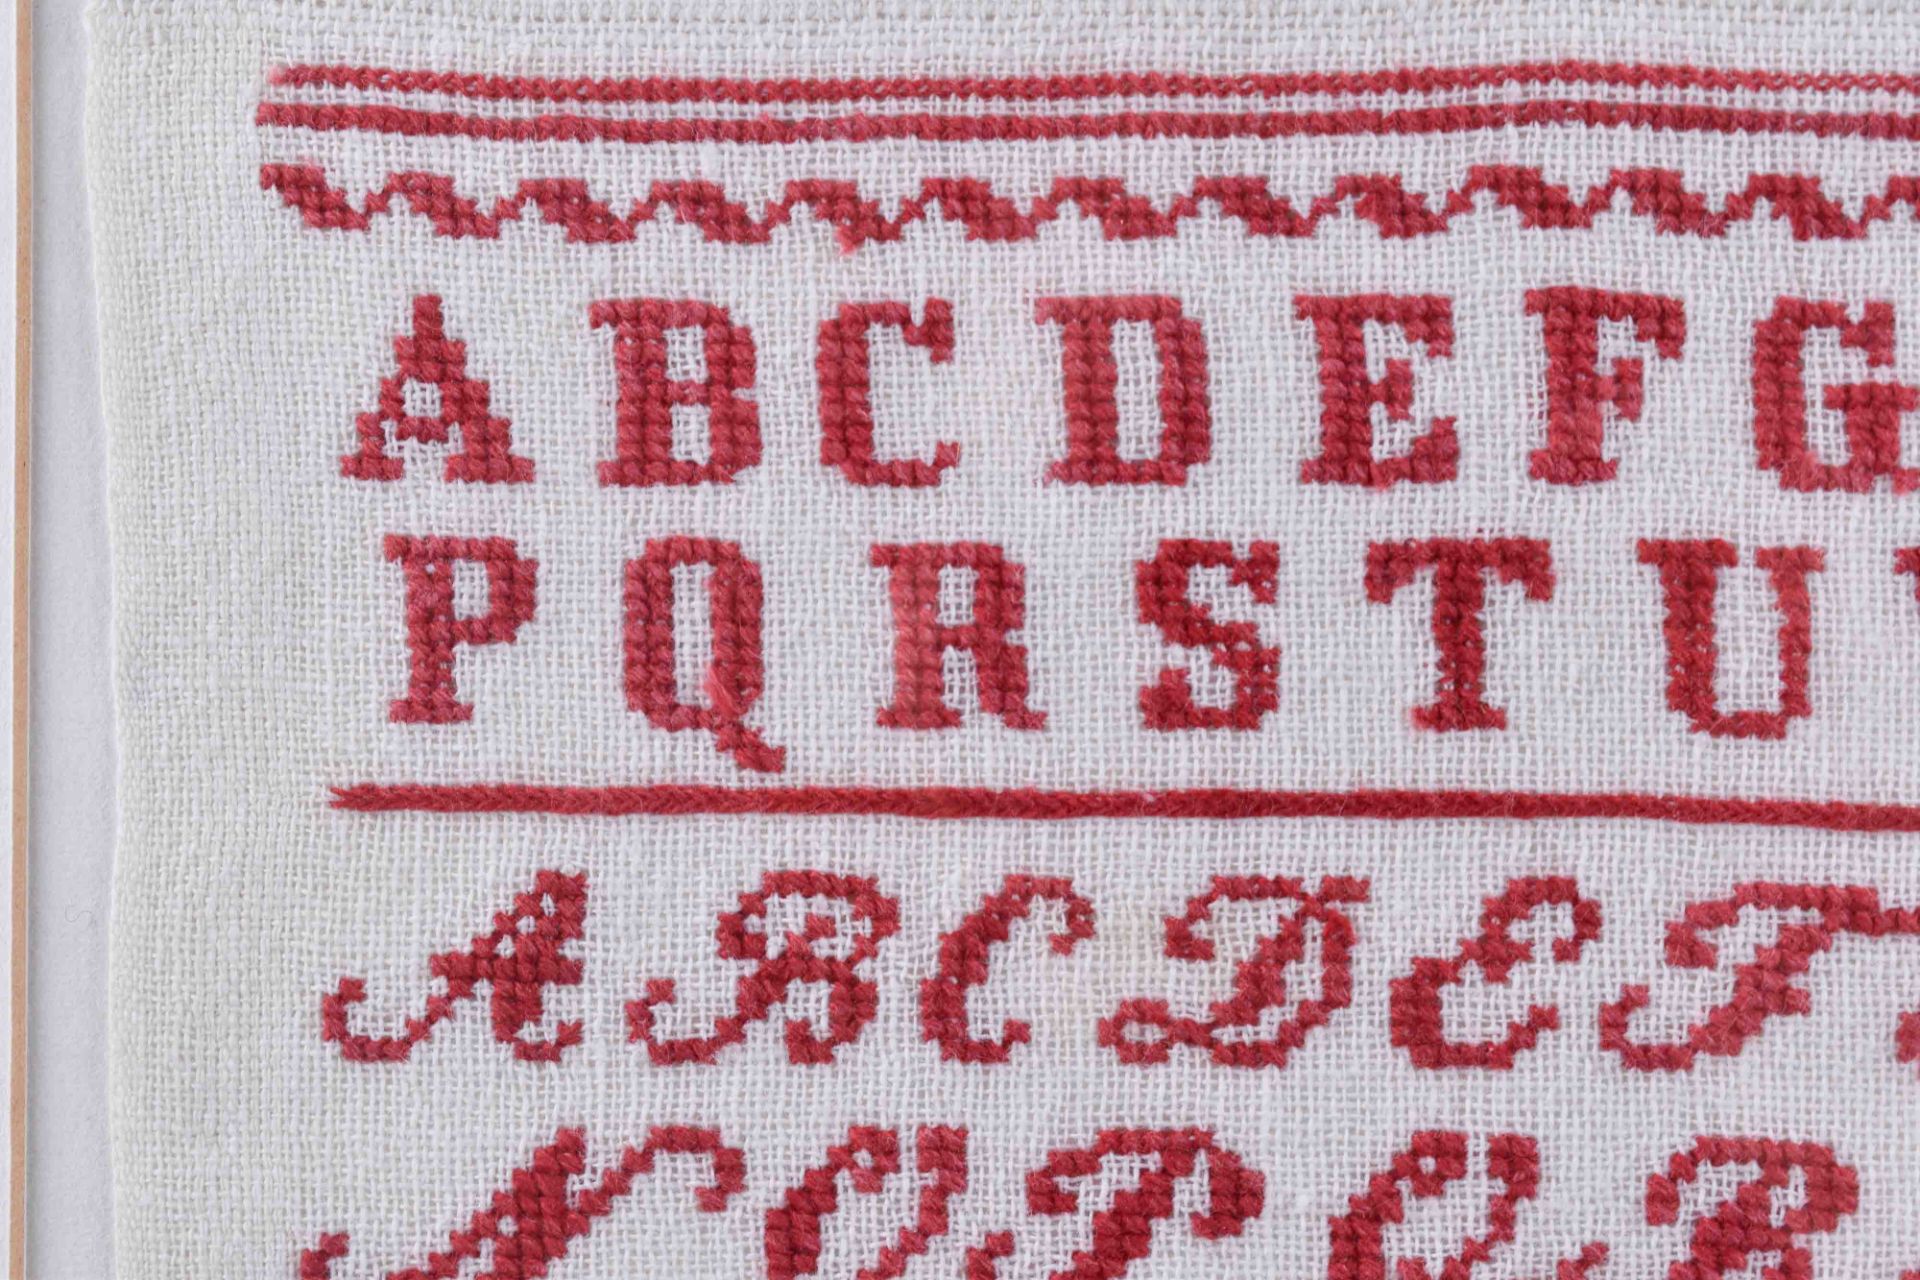 2 alphabetic embroideries from the 20svisible dimensions: 16.5 cm x 22.5 cm, visible dimensions 28 - Bild 7 aus 7